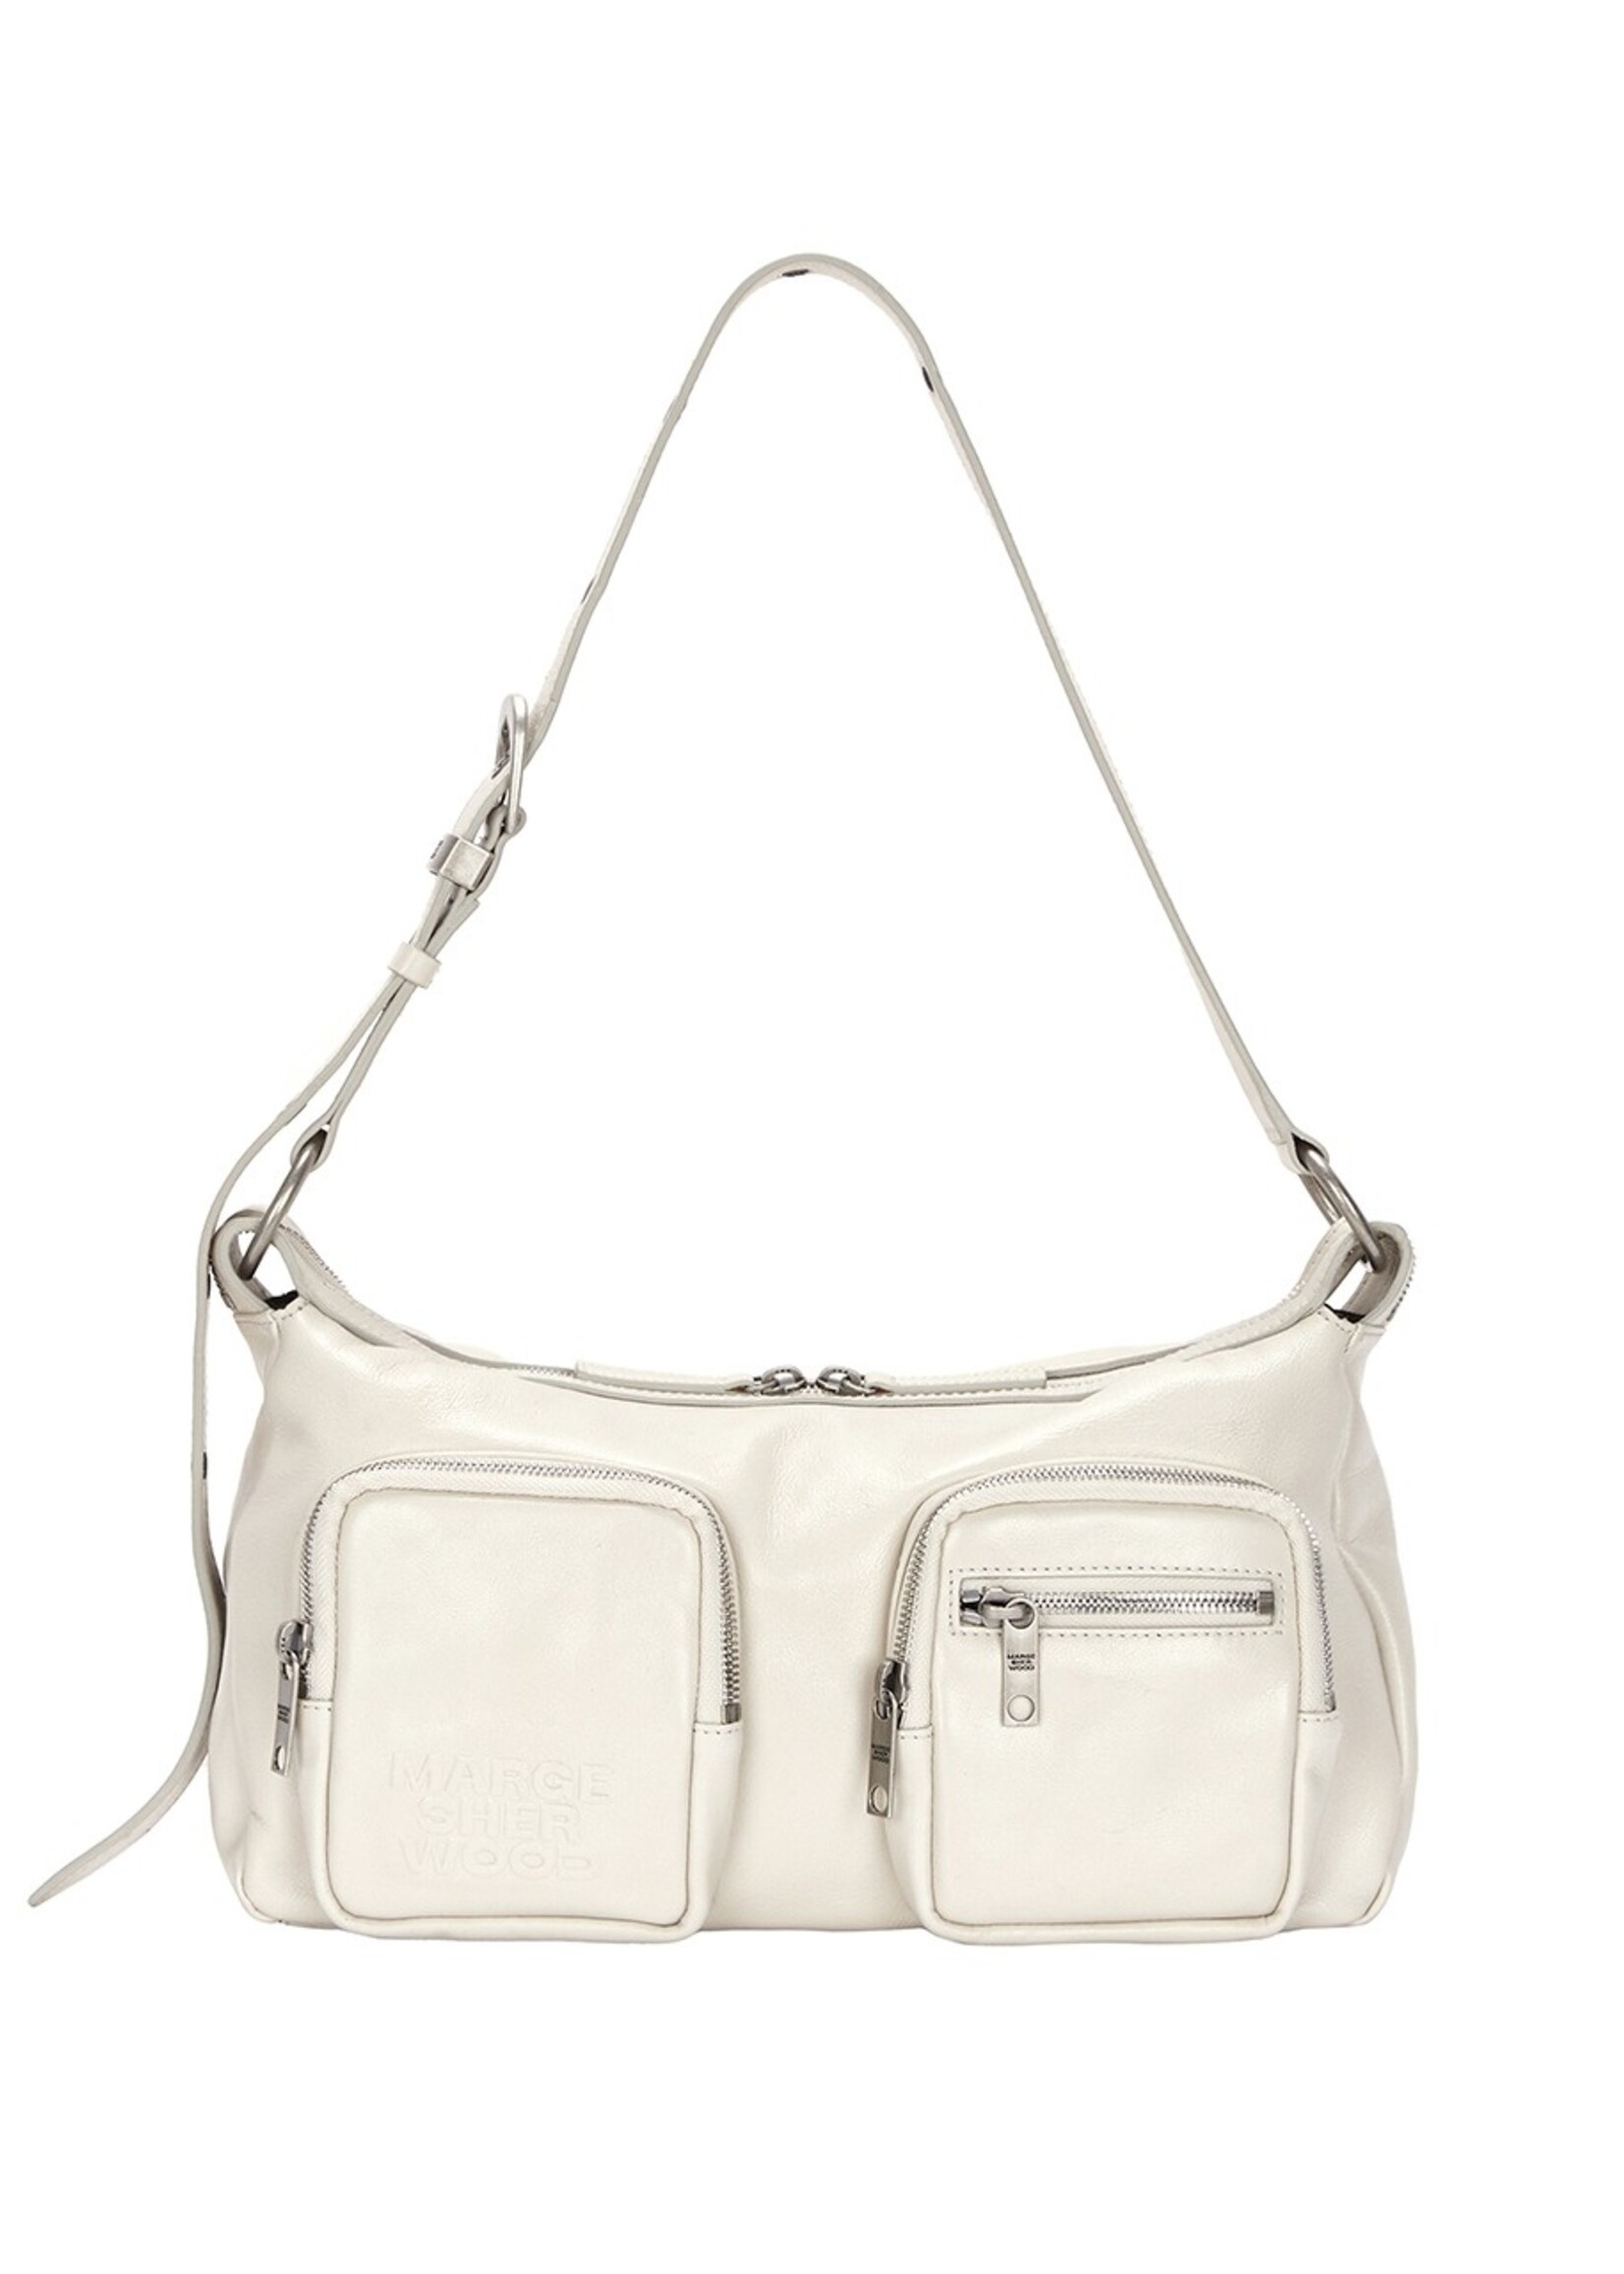 MARGE SHERWOOD OUTPOCKET HOBO BAG IN GLOSSY CREAM LEATHER